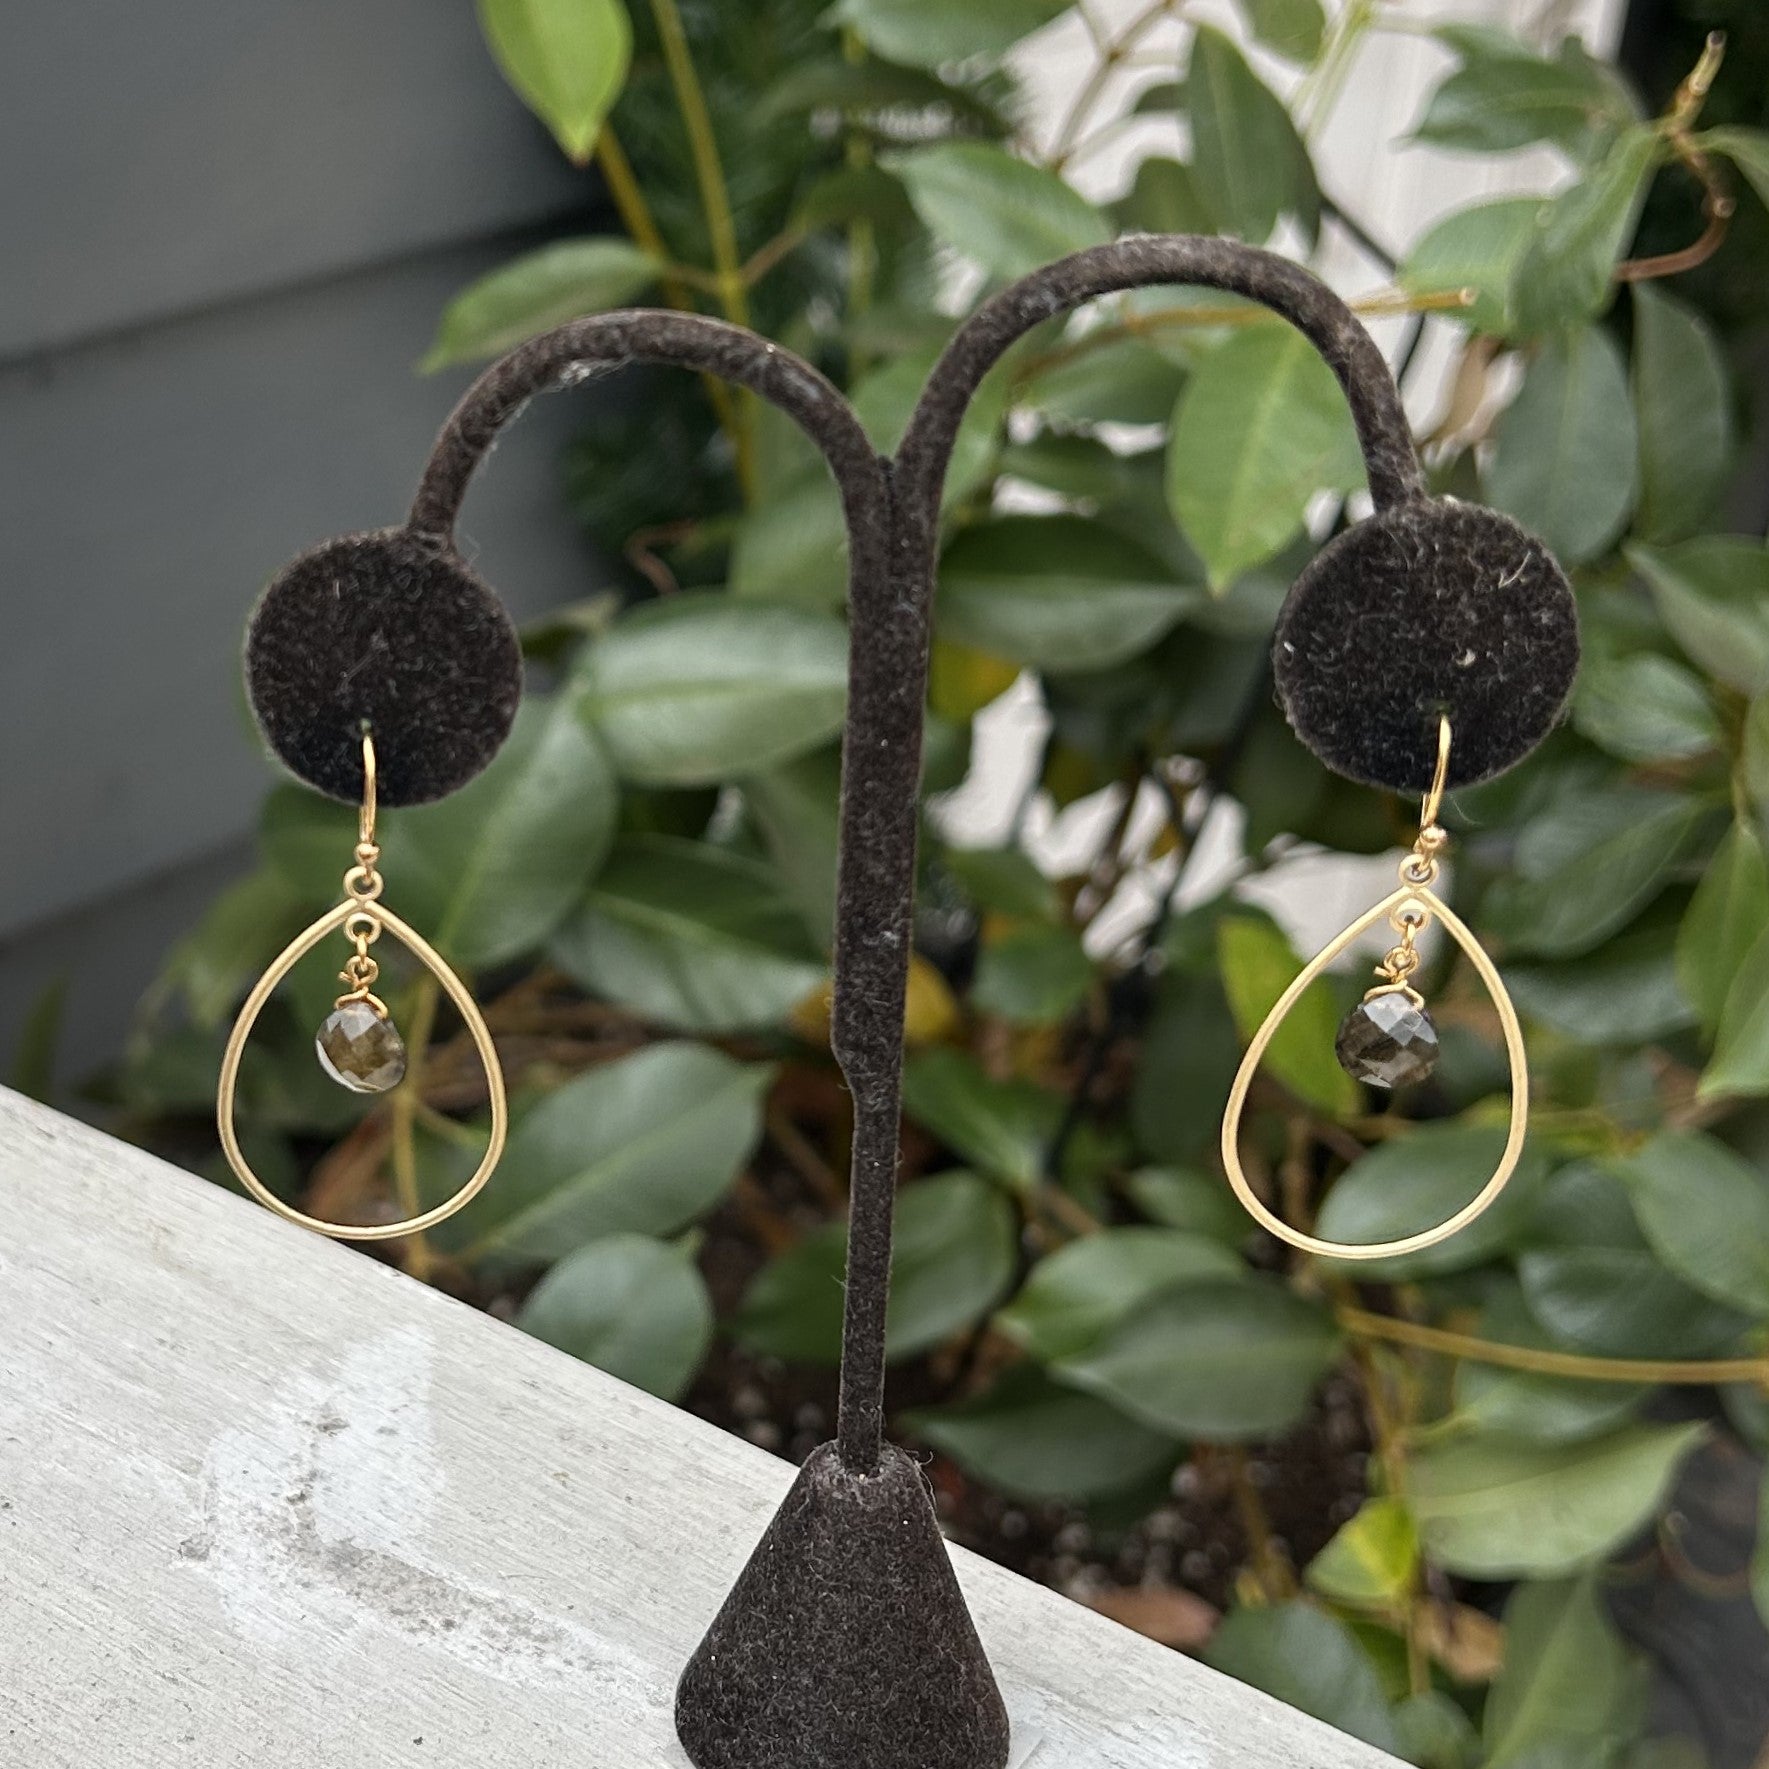 These dainty Gold Teardrop Earrings are the perfect combination of elegance and luxury. The beautiful teardrop shape with a dark gray/brown stone is a timeless classic that will never go out of style. Wear them for any special occasion and feel your best.